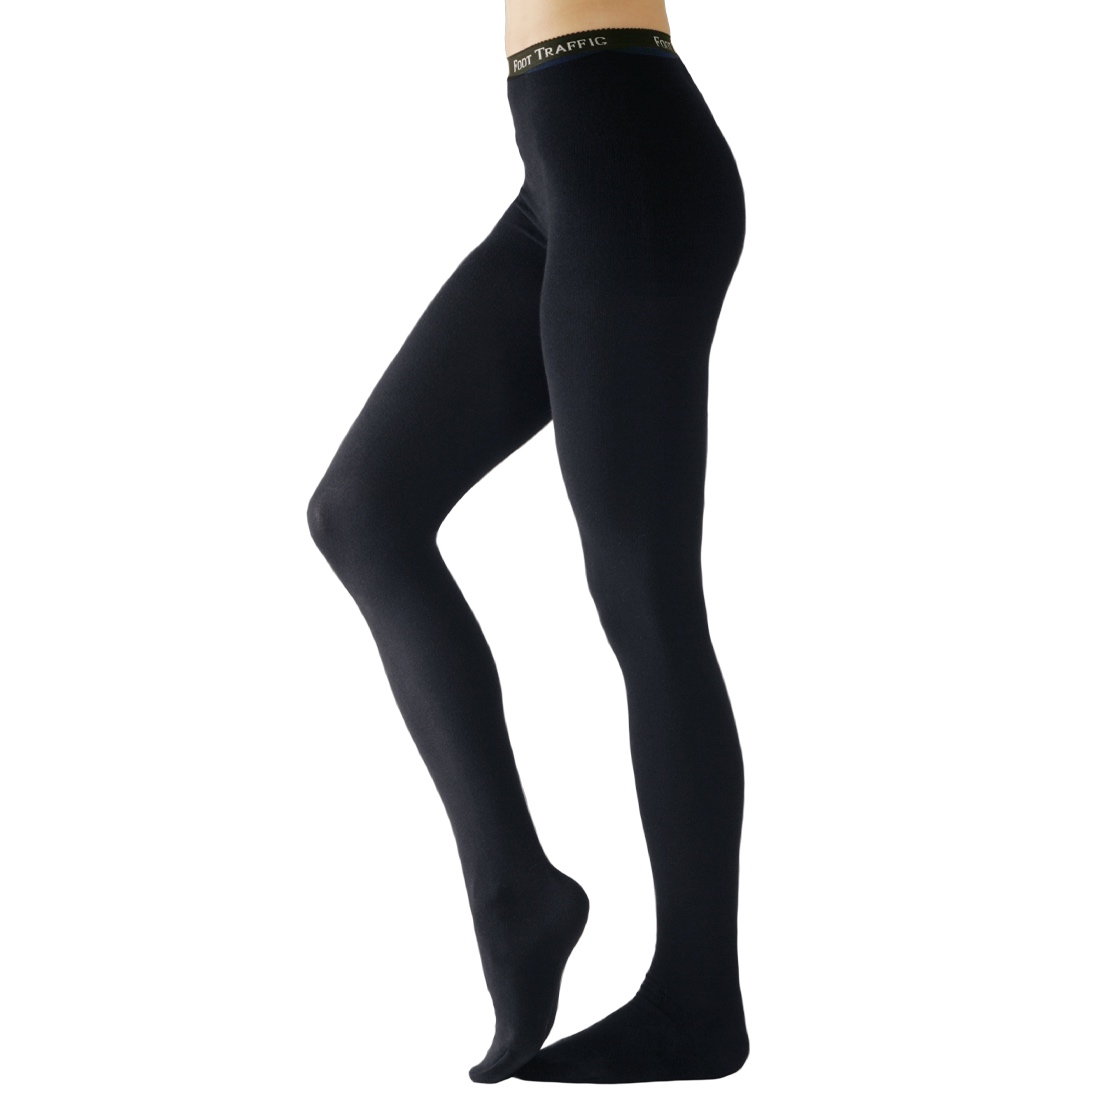 Petite Signature Combed Cotton Tights, Tights: Foot Traffic